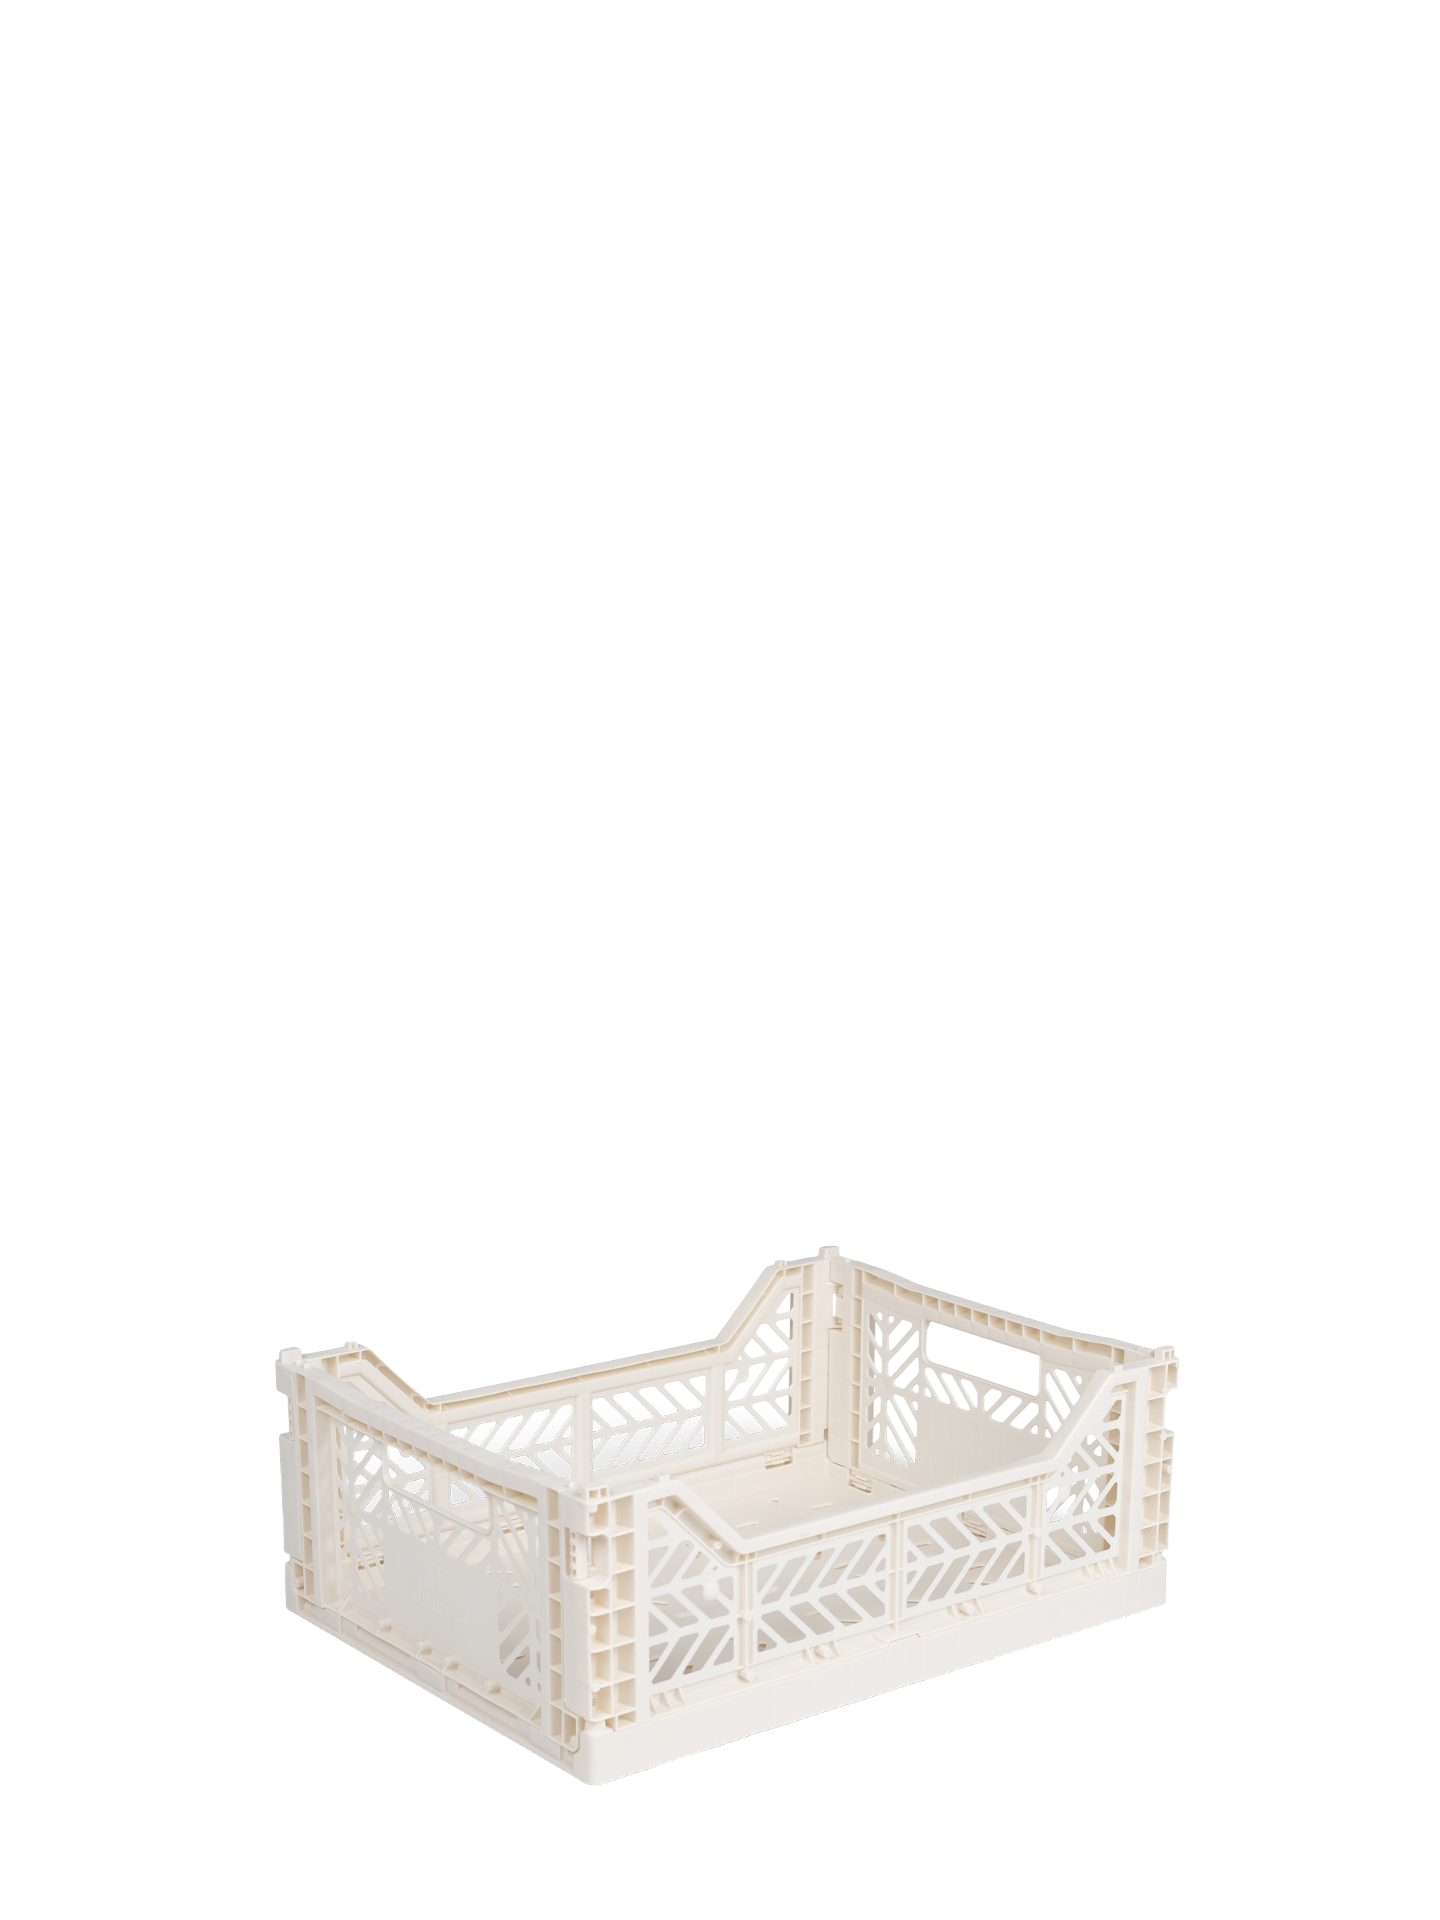 Easy to fold when not in use, the Aykasa medium size plastic storage crate in off-white Coconut milk can be stacked on top of each other and the colour range has a perfect hue for any room.